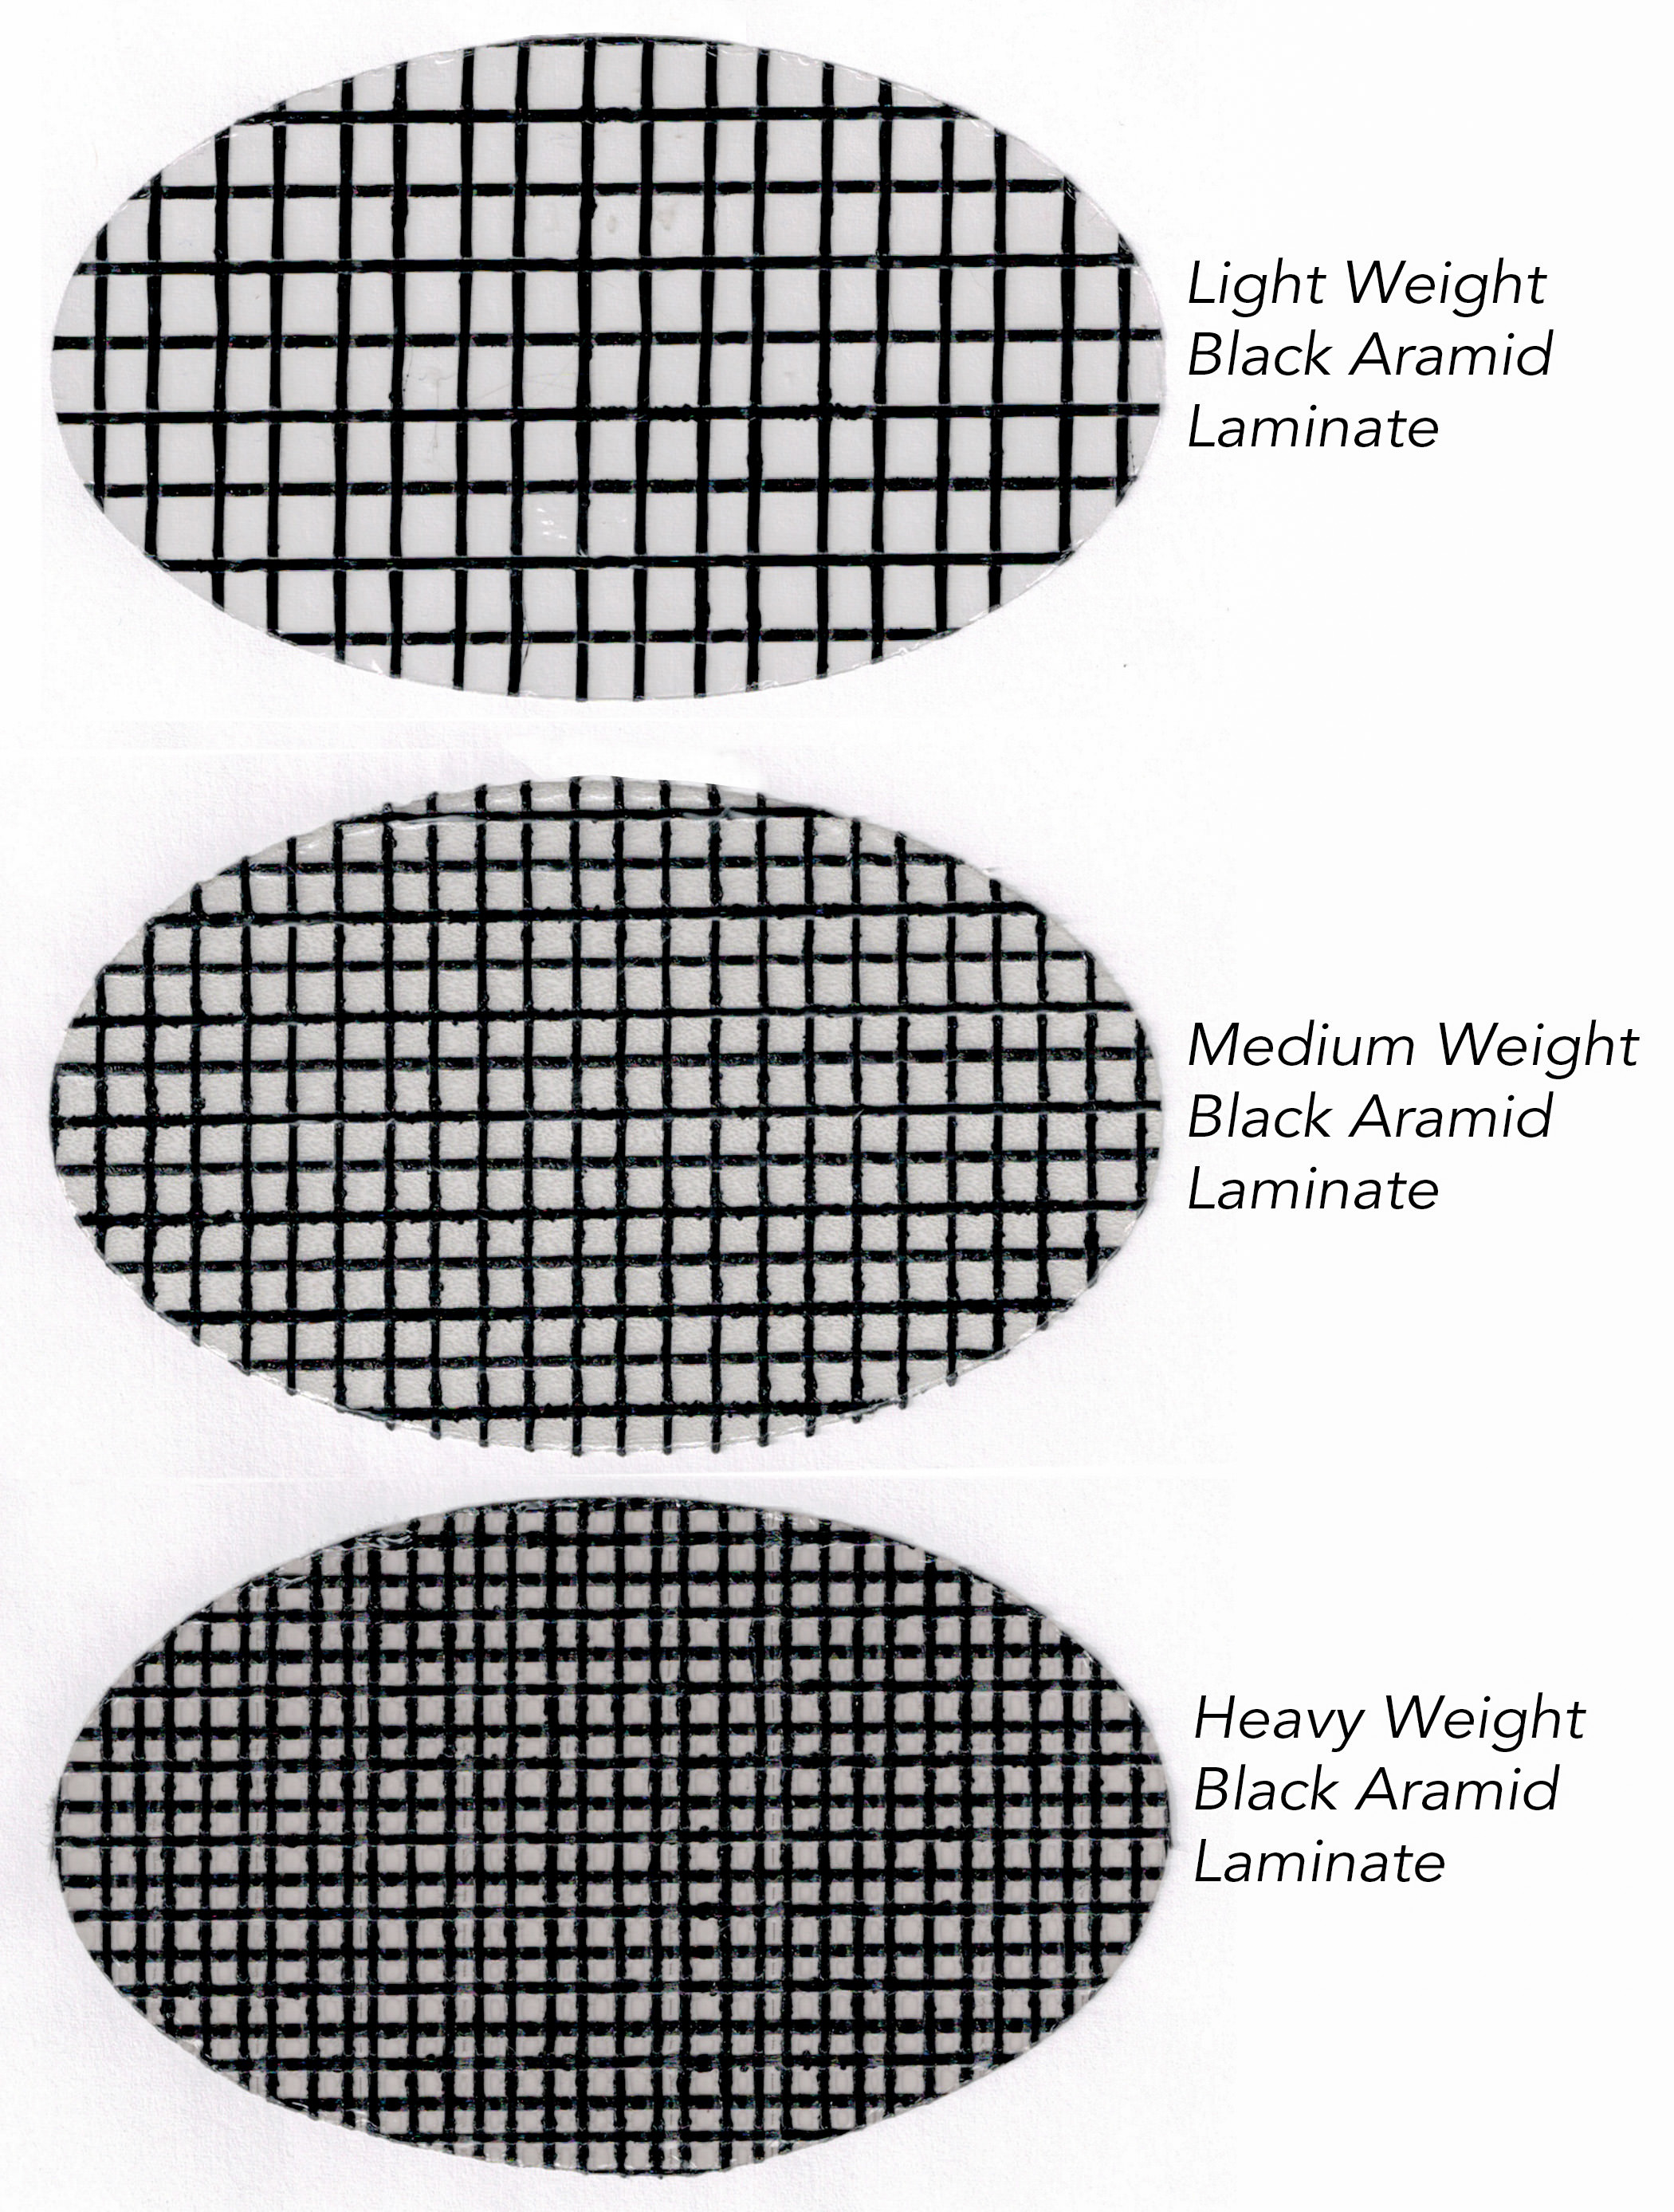 Three different weights of black aramid laminate made by Dimension Polyant for Tape-Drive sails. The lightweight material is used for small boats or light wind genoas. The medium weight laminate can be used for mainsails up to 45 feet, while the hea…